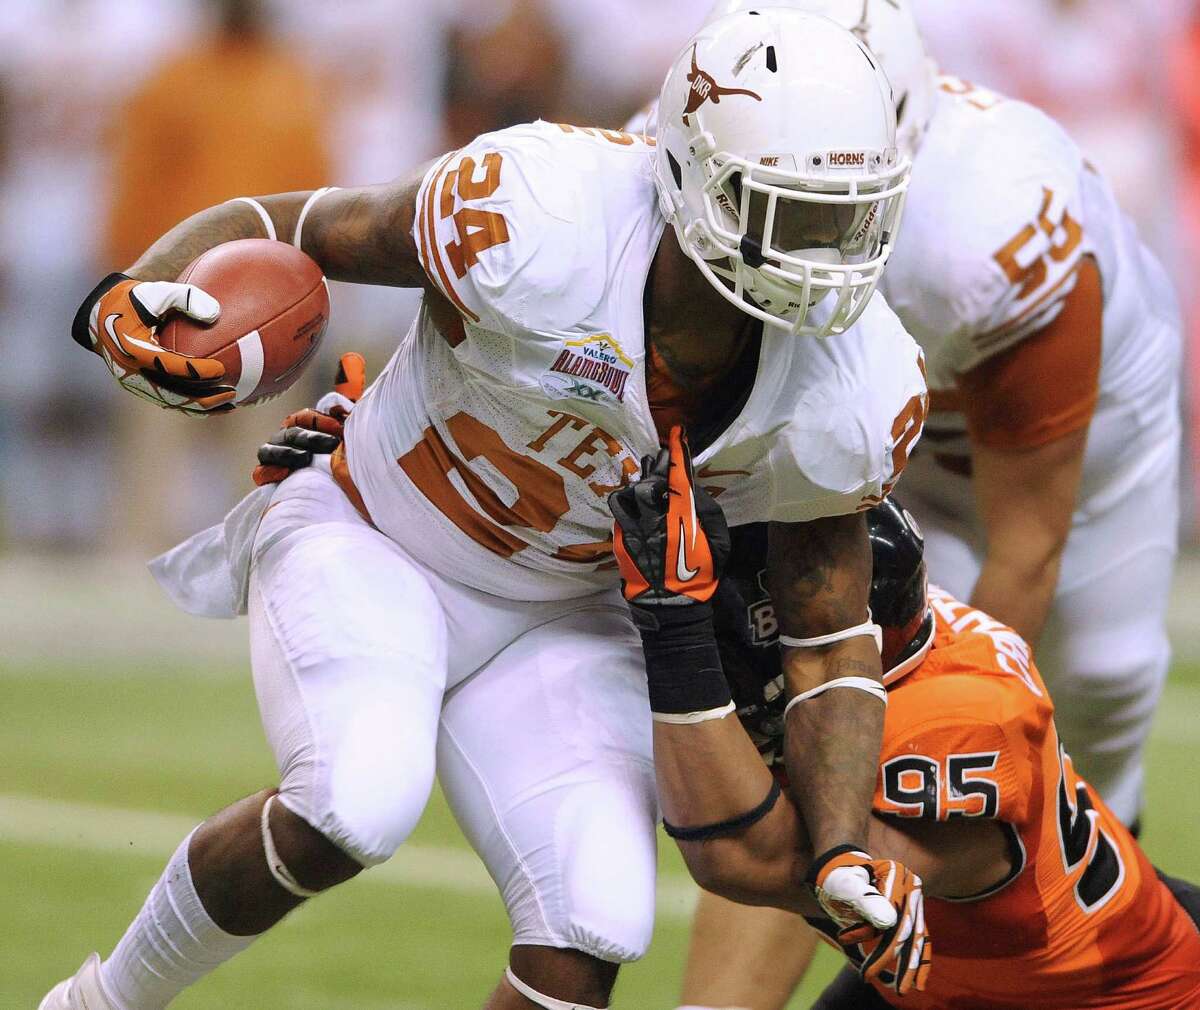 Texas running back Joe Bergeron is dragged down by his shirt collar by Oregon State defender Scott Crichton (95) during Valero Alamo Bowl action in the Alamodome on Saturday, Dec. 29, 2012.